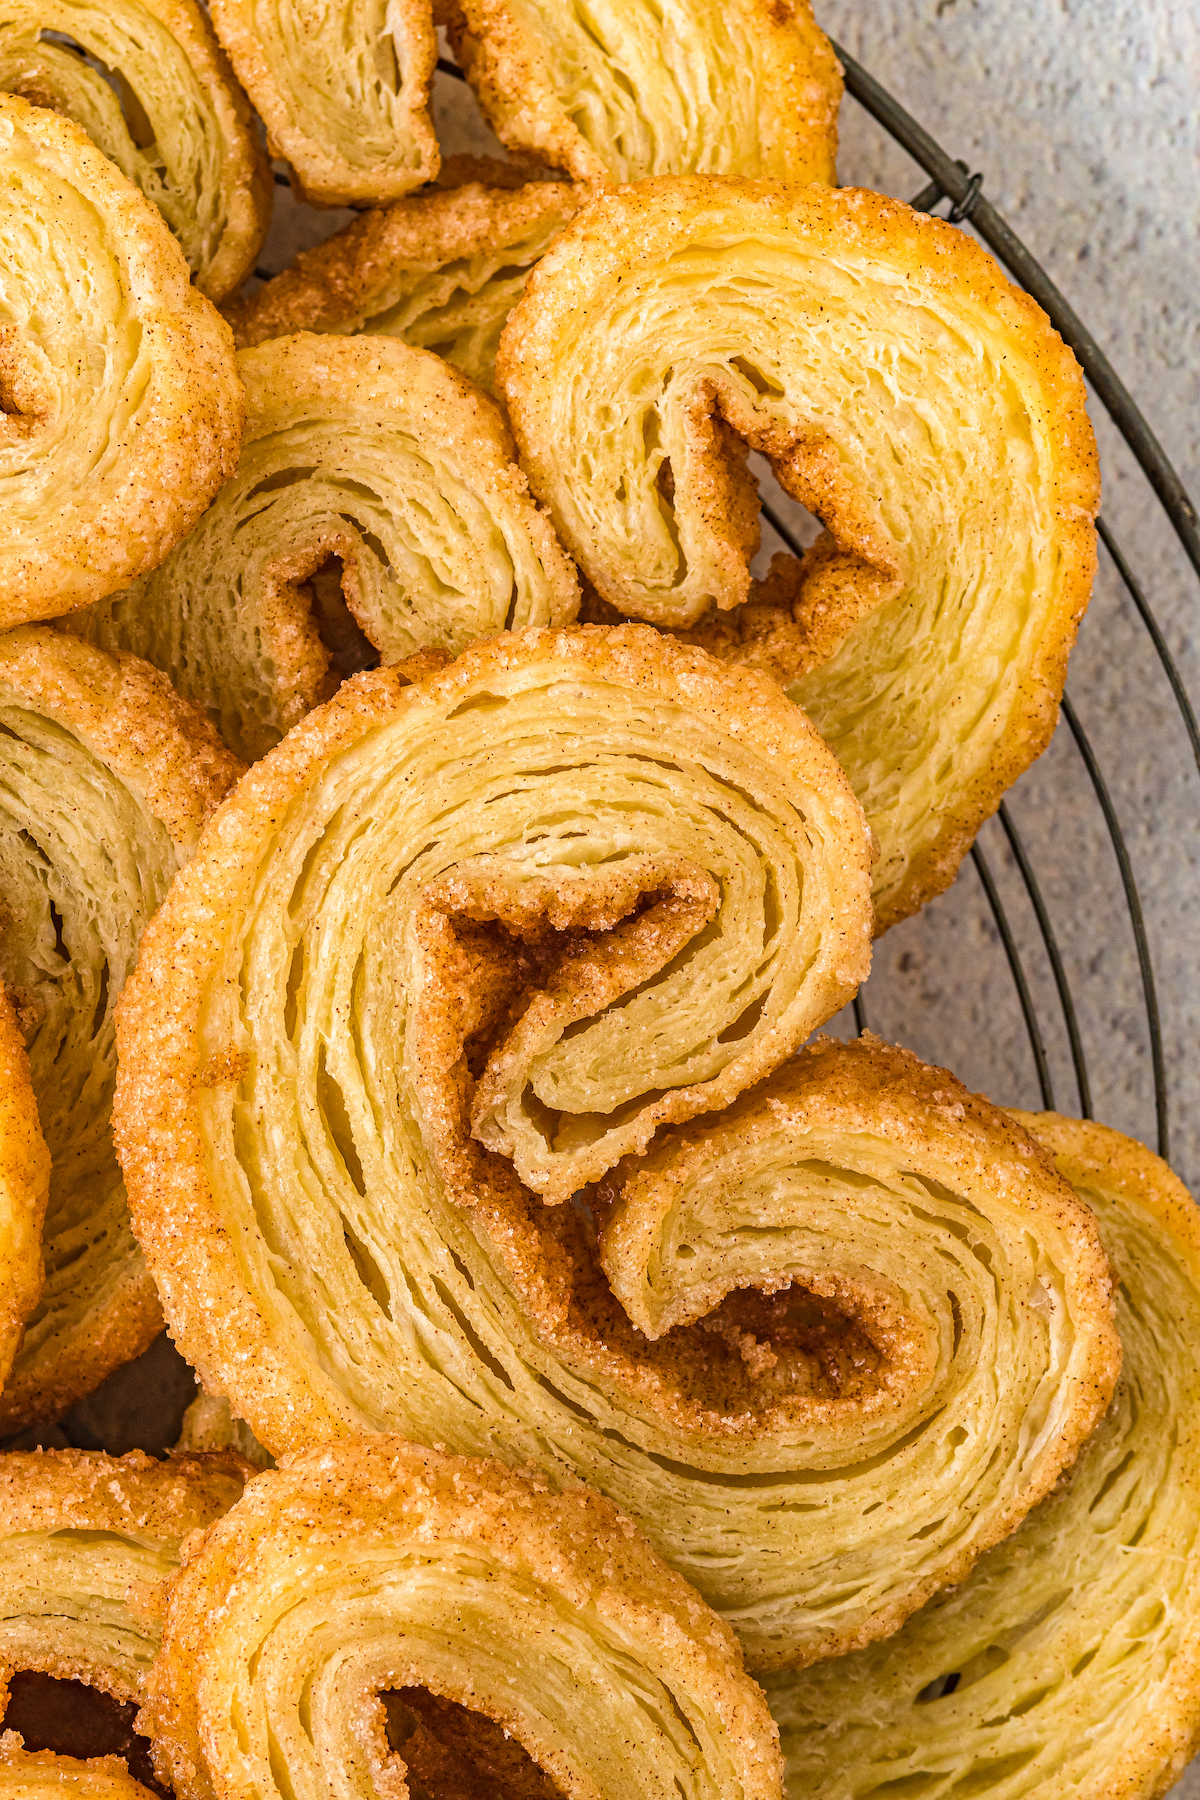 Small pastry cookies that are golden brown and have curled edges